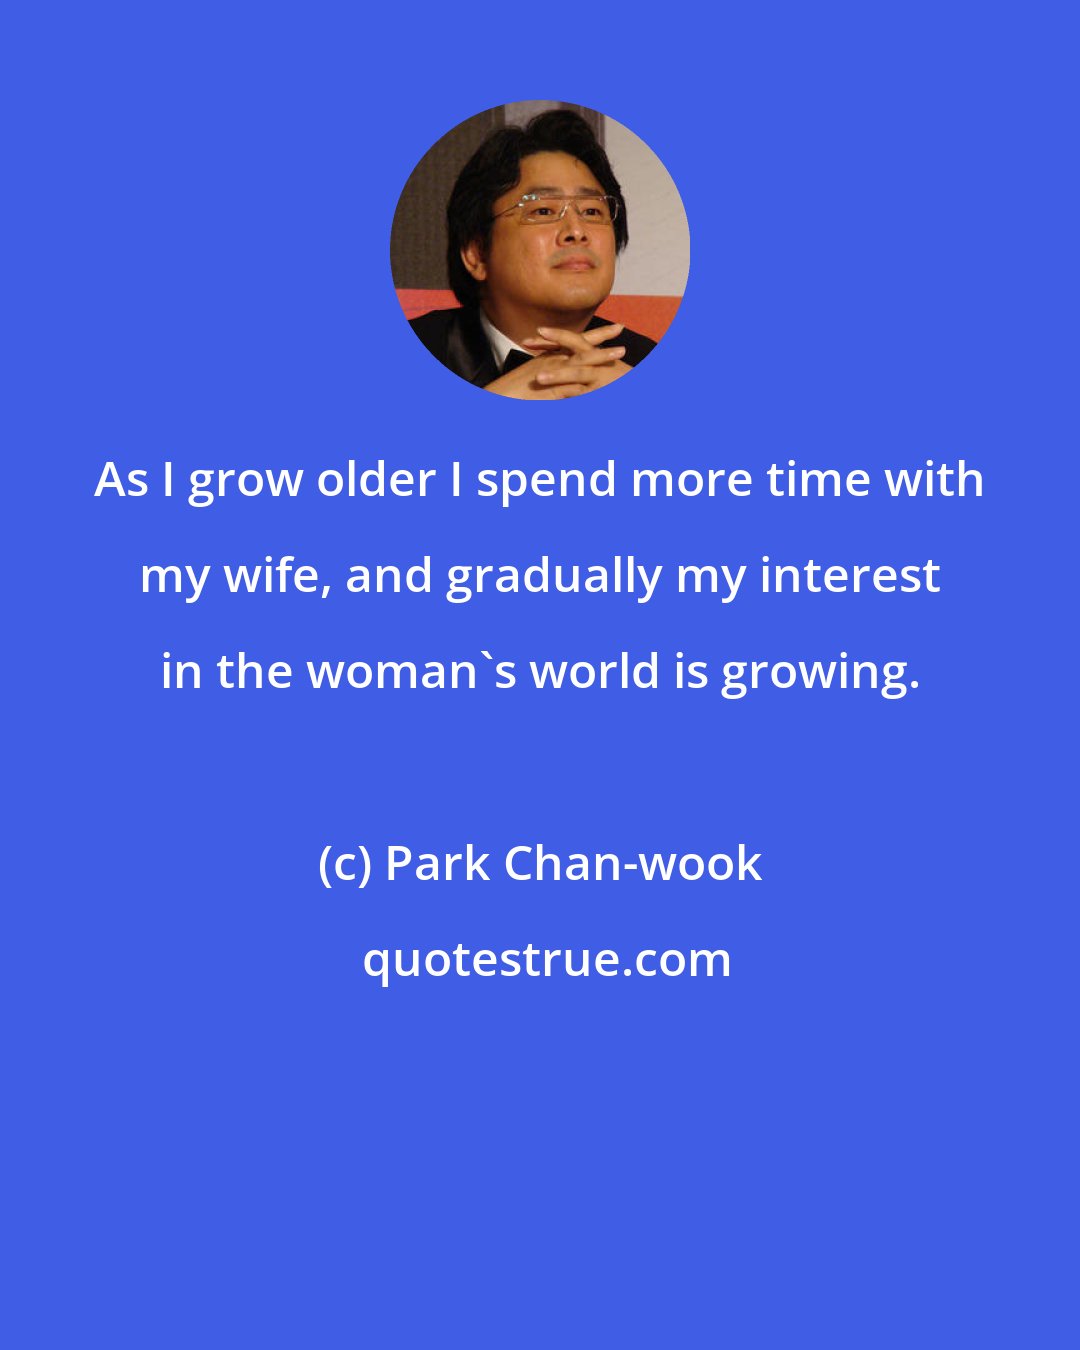 Park Chan-wook: As I grow older I spend more time with my wife, and gradually my interest in the woman's world is growing.